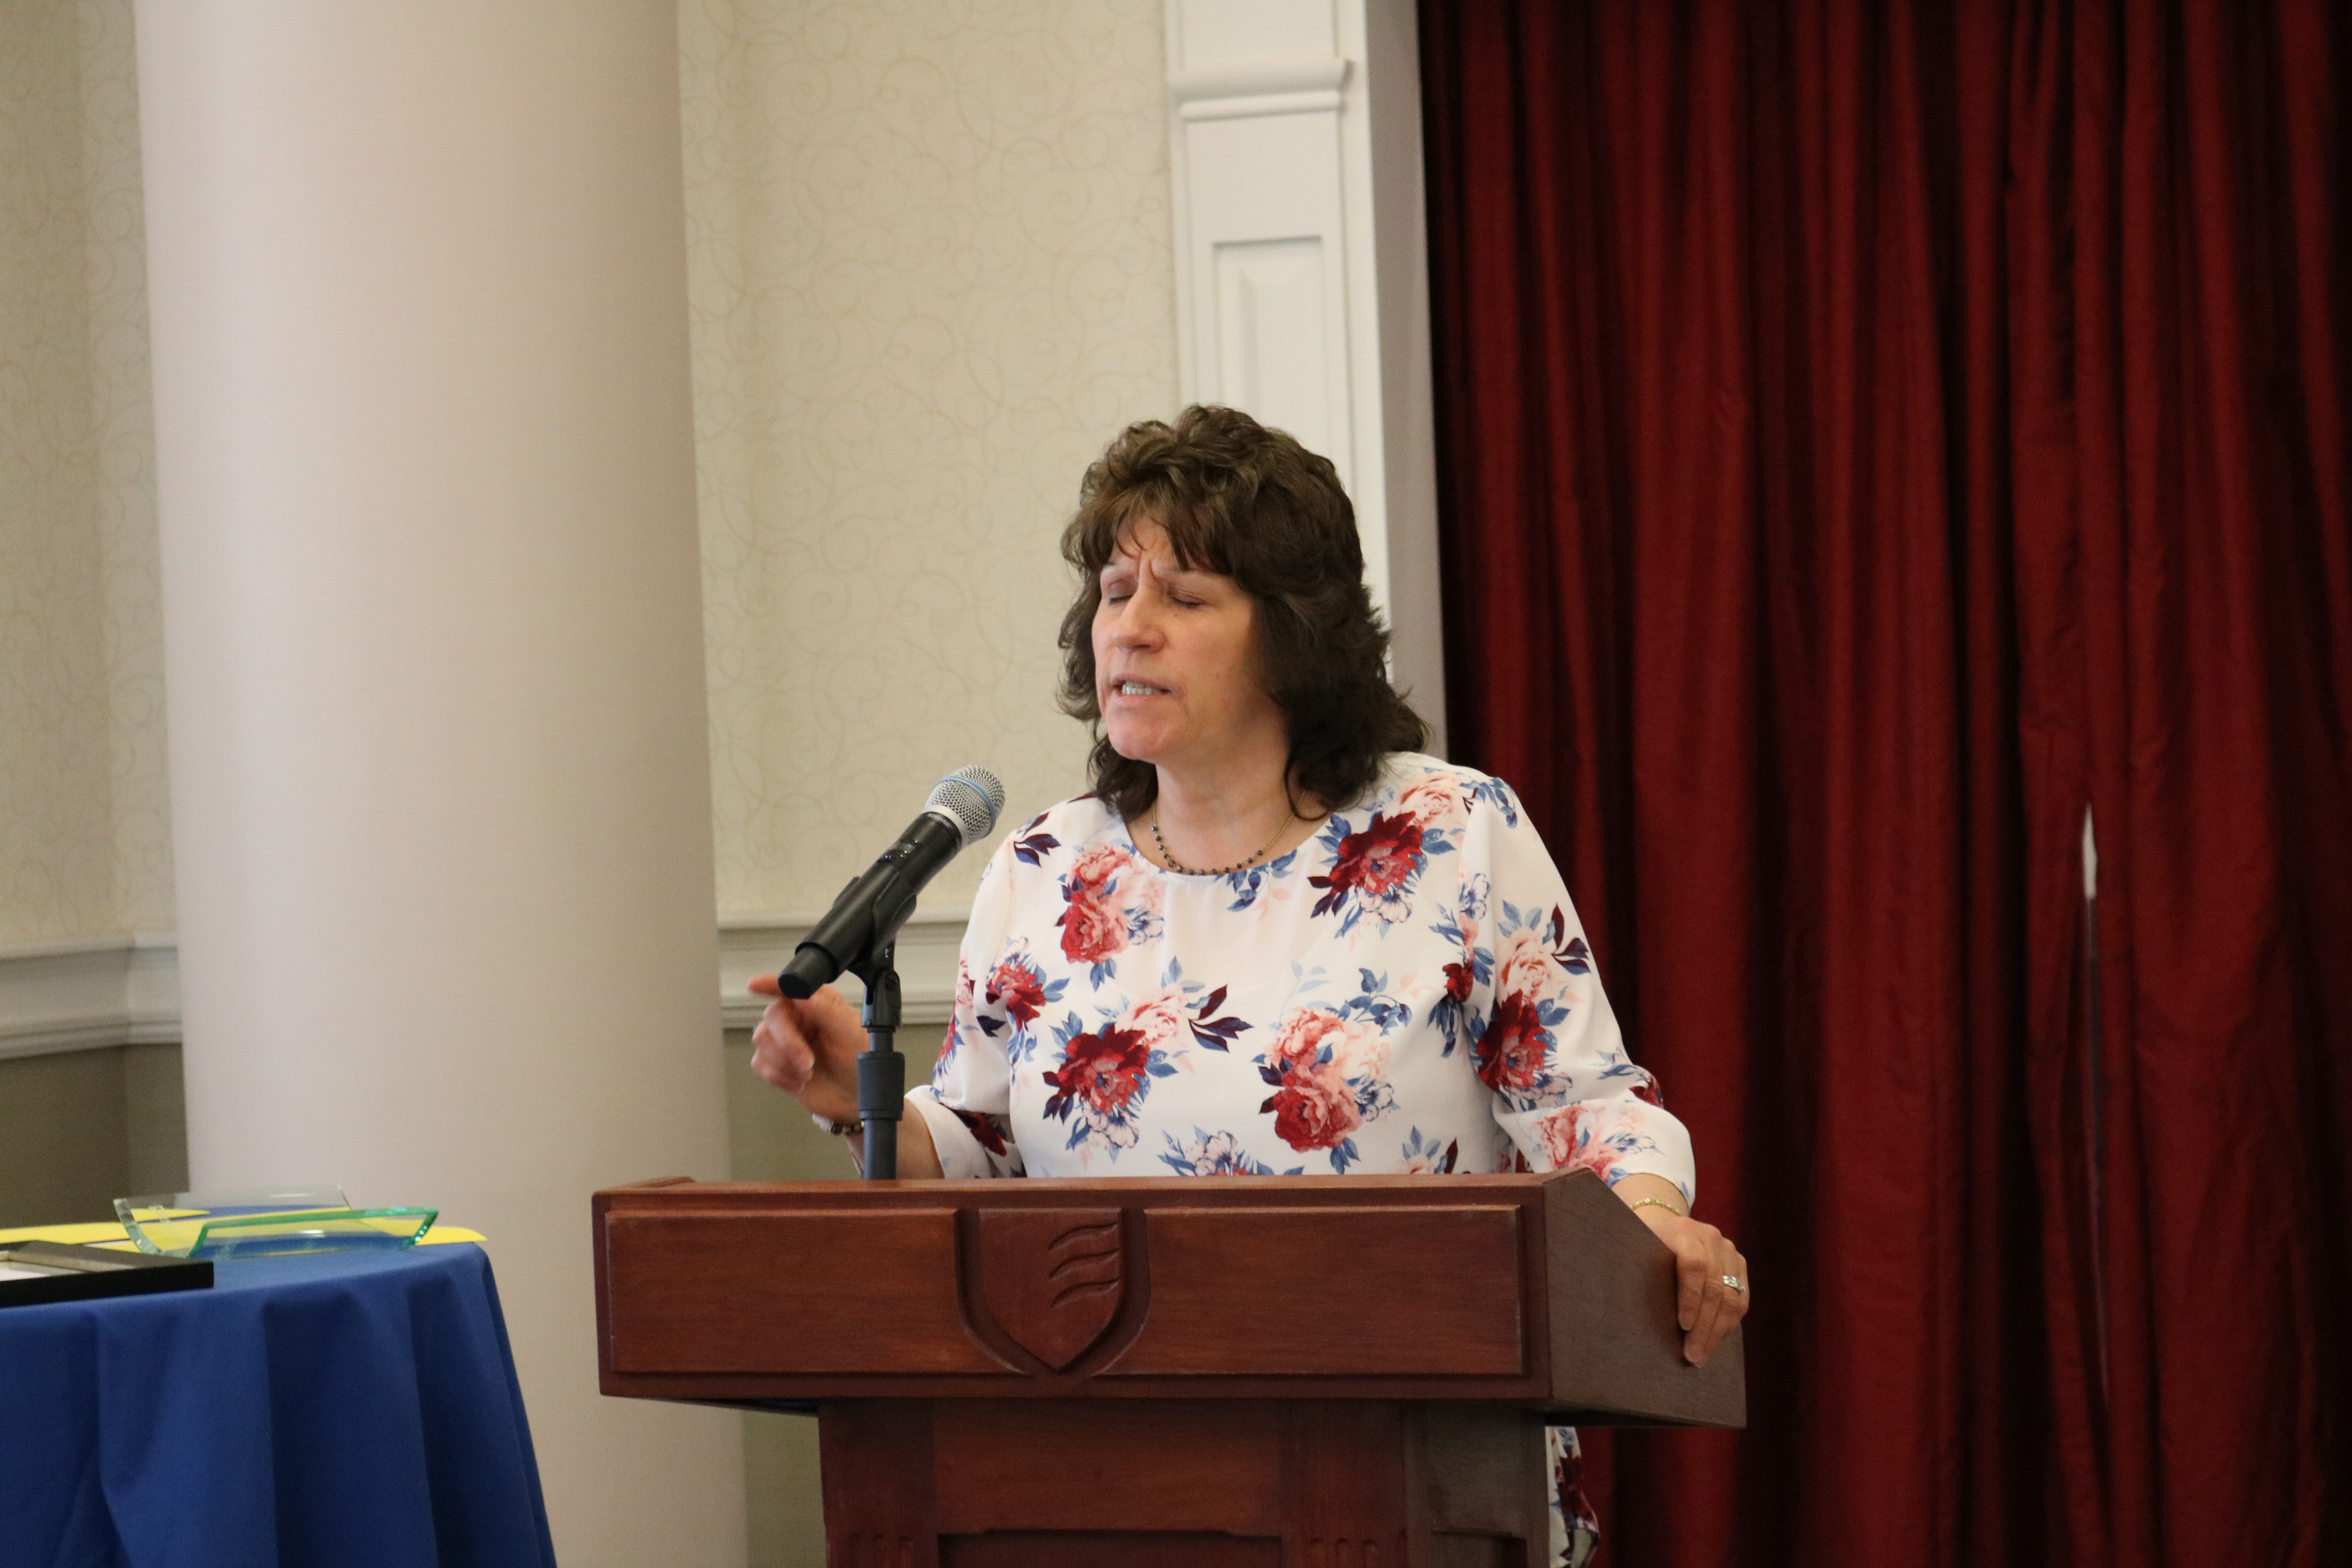 Annual Luncheon 2019 - Pastor Pam Schnelzer of the Salvation Army Opens the Luncheon with a Prayer